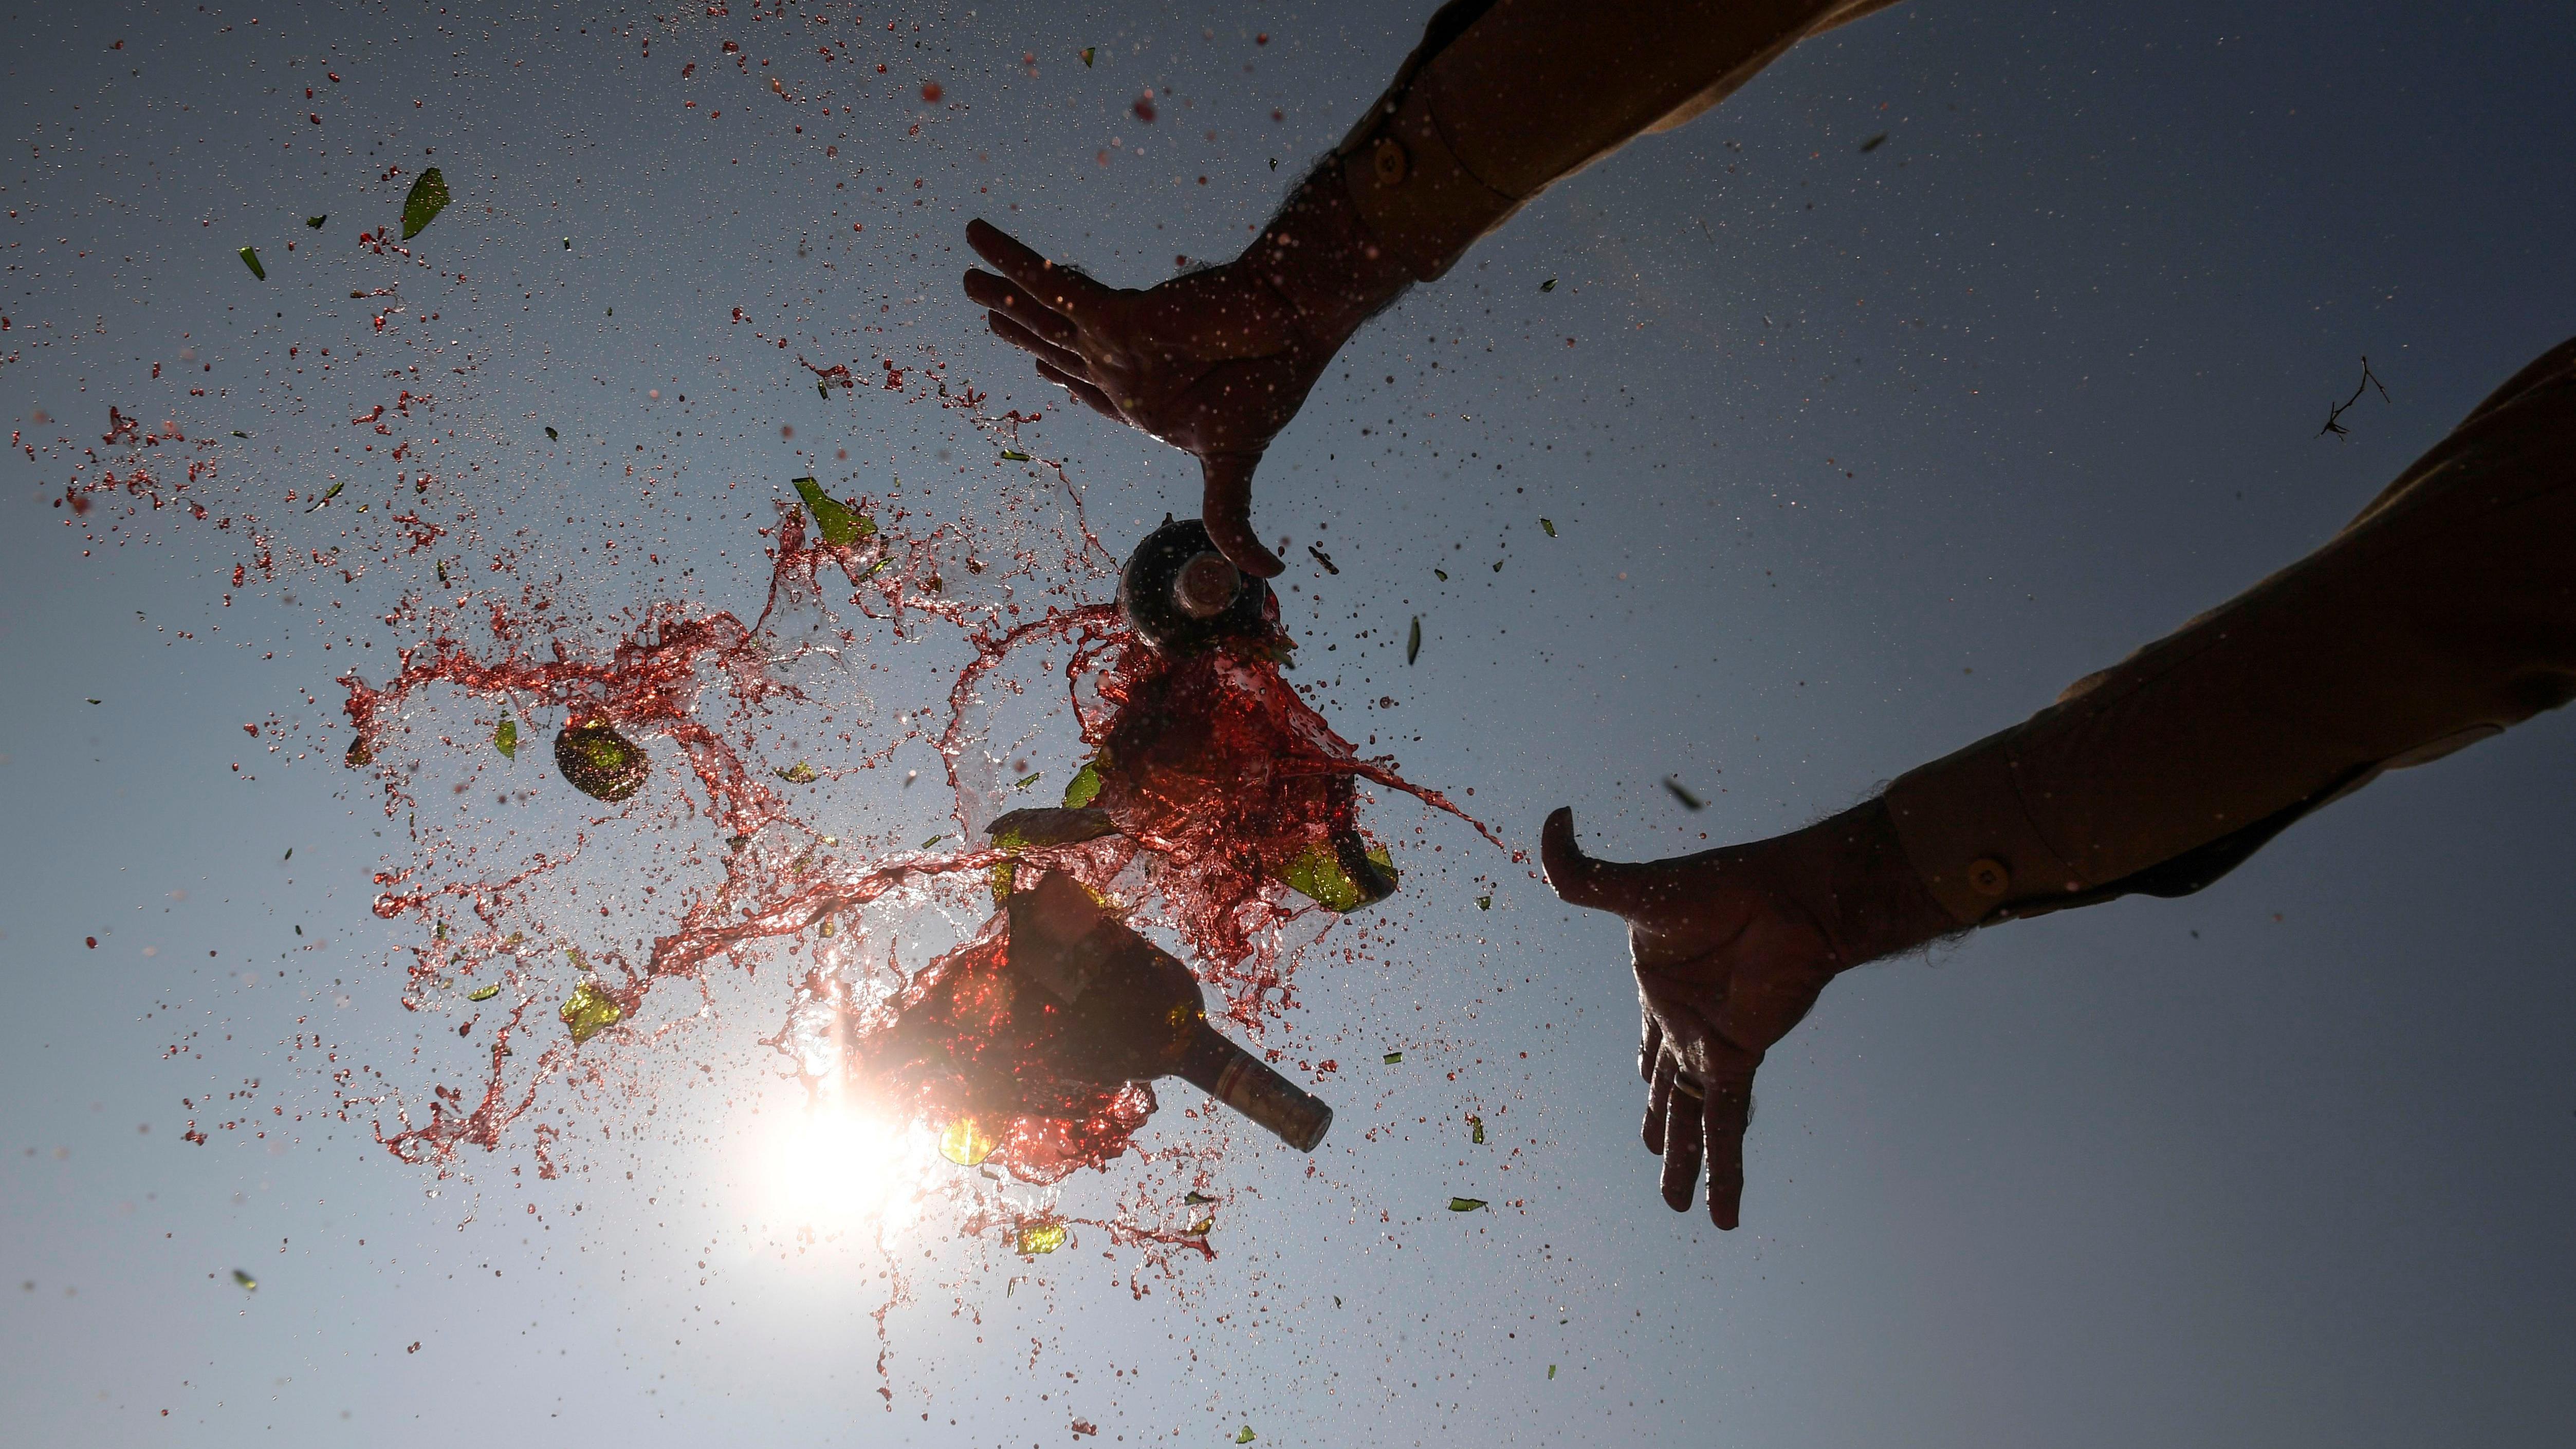 Alcoholic beverages spray into the air as an official smashes seized bottles, previously smuggled into the country, on the outskirts of Karachi on 3 December 2019